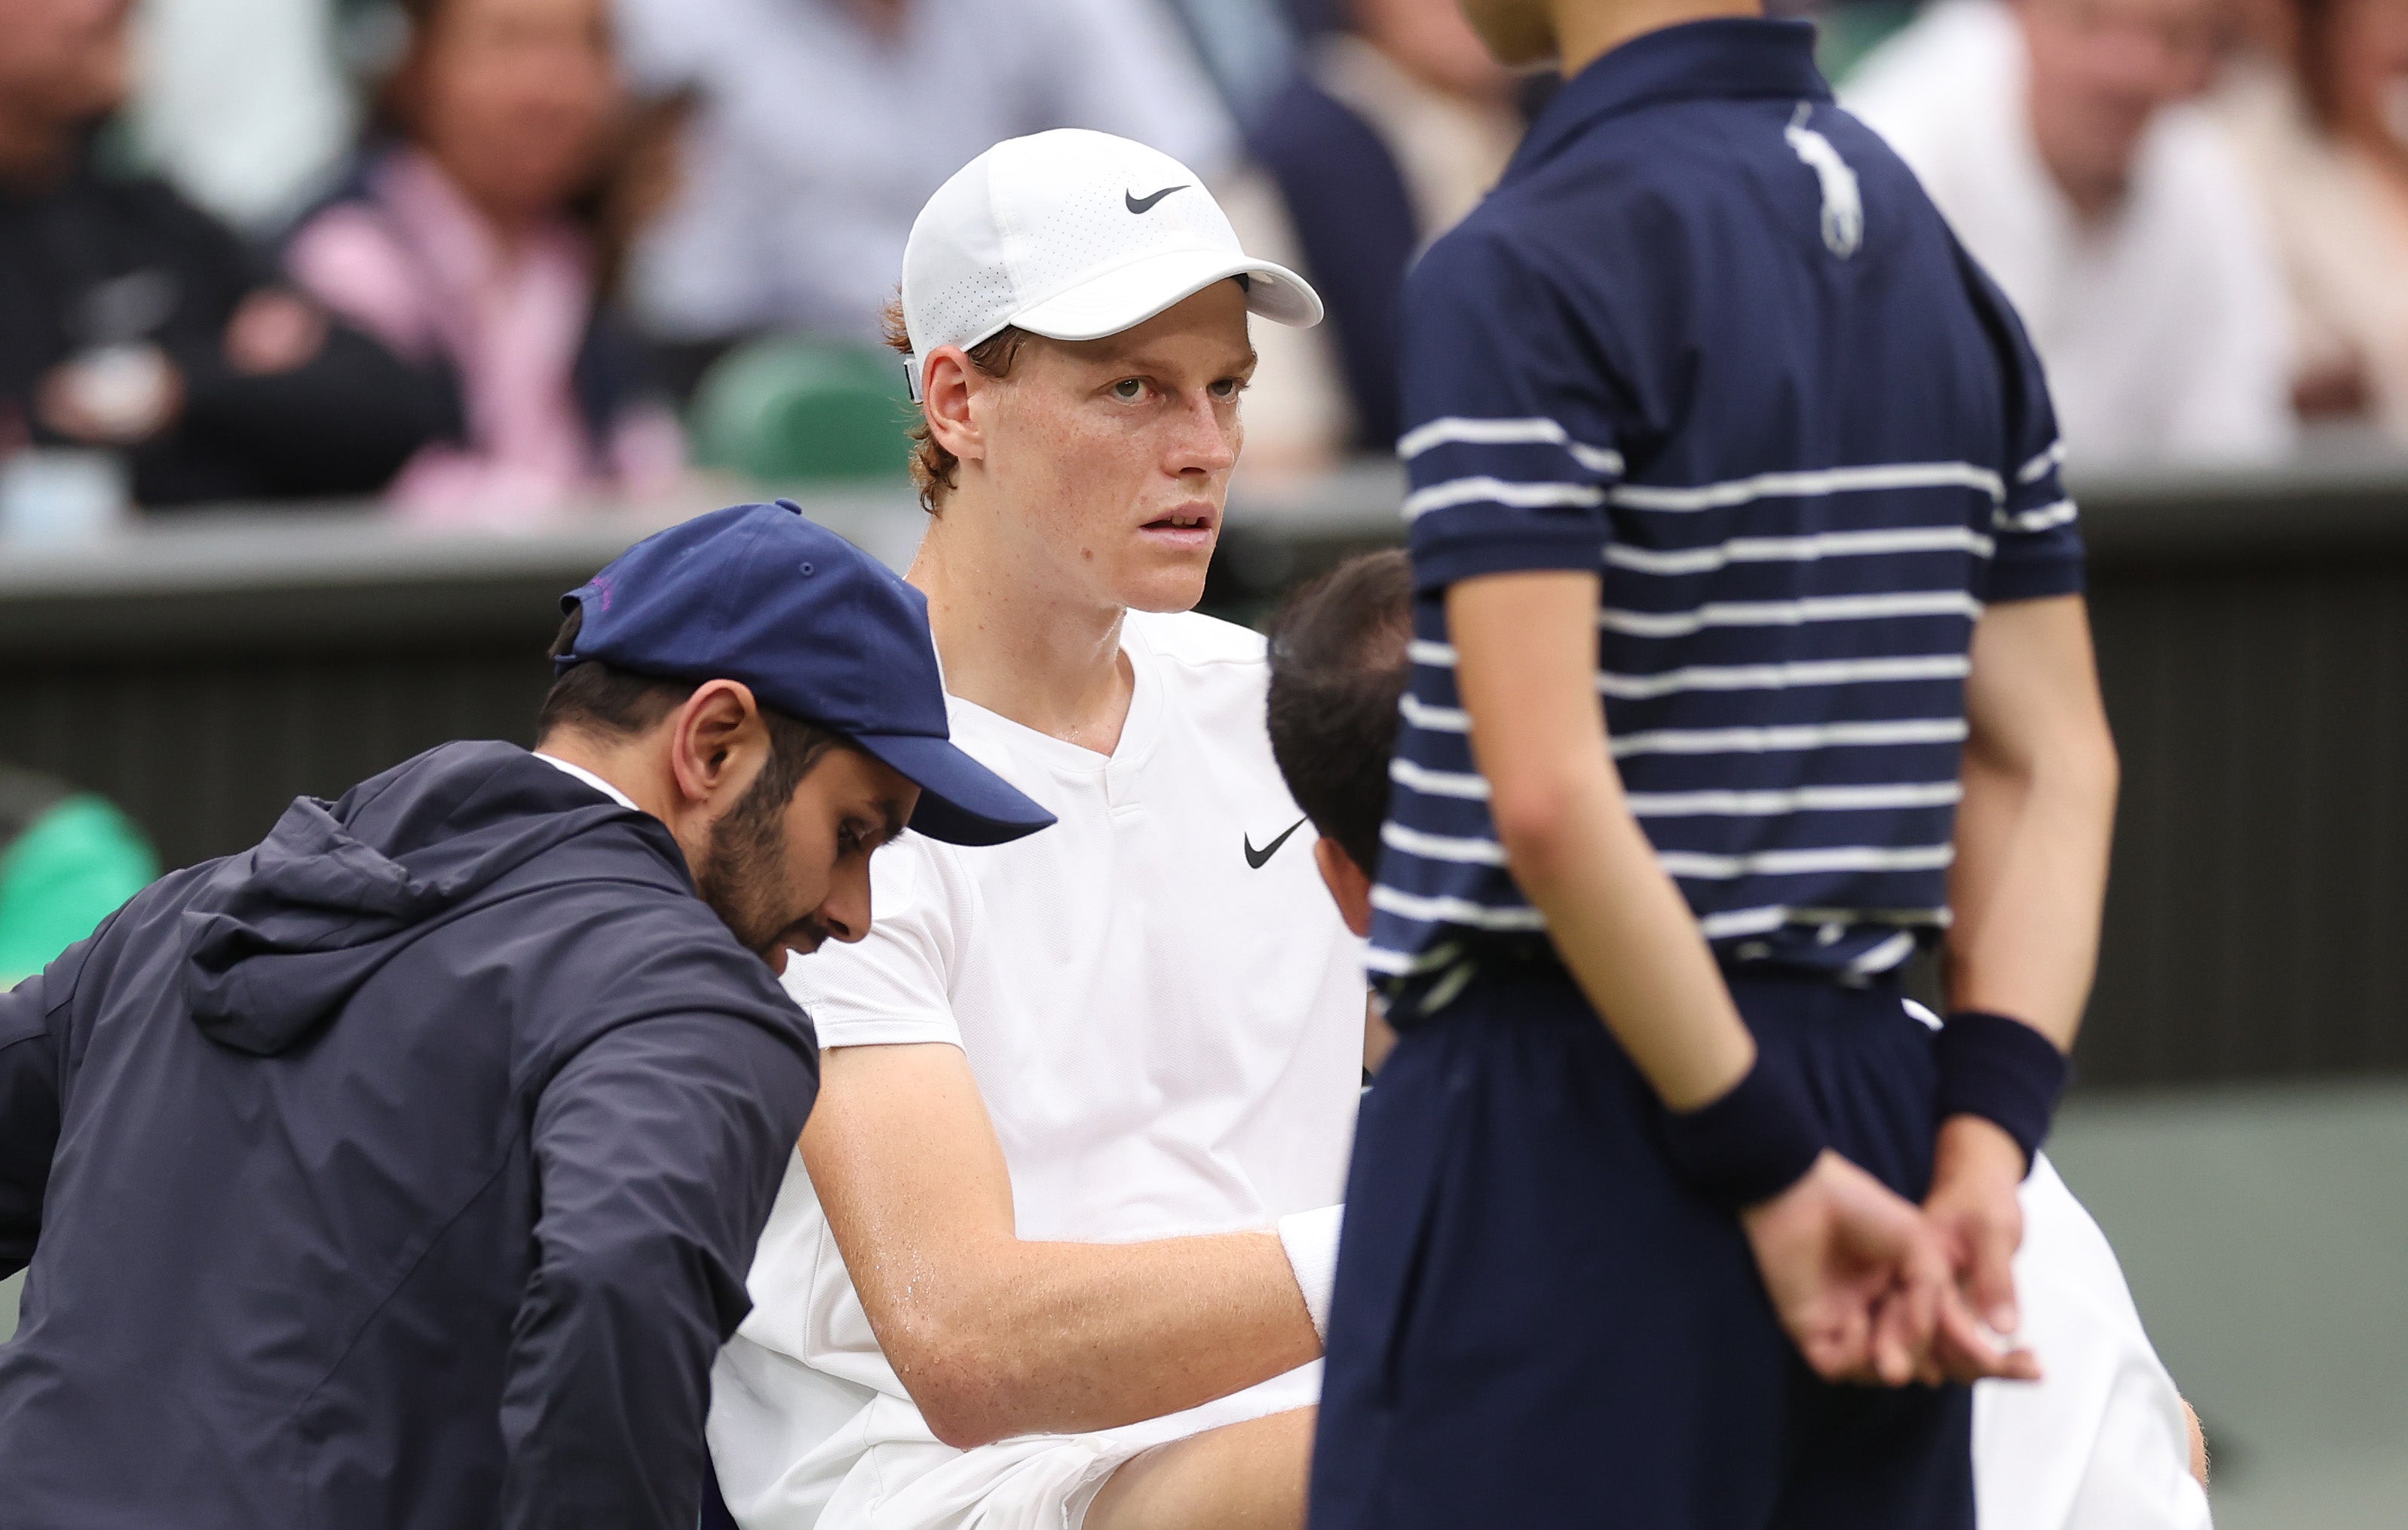 Jannik Sinner was experiencing dizziness out on Centre Court on Tuesday